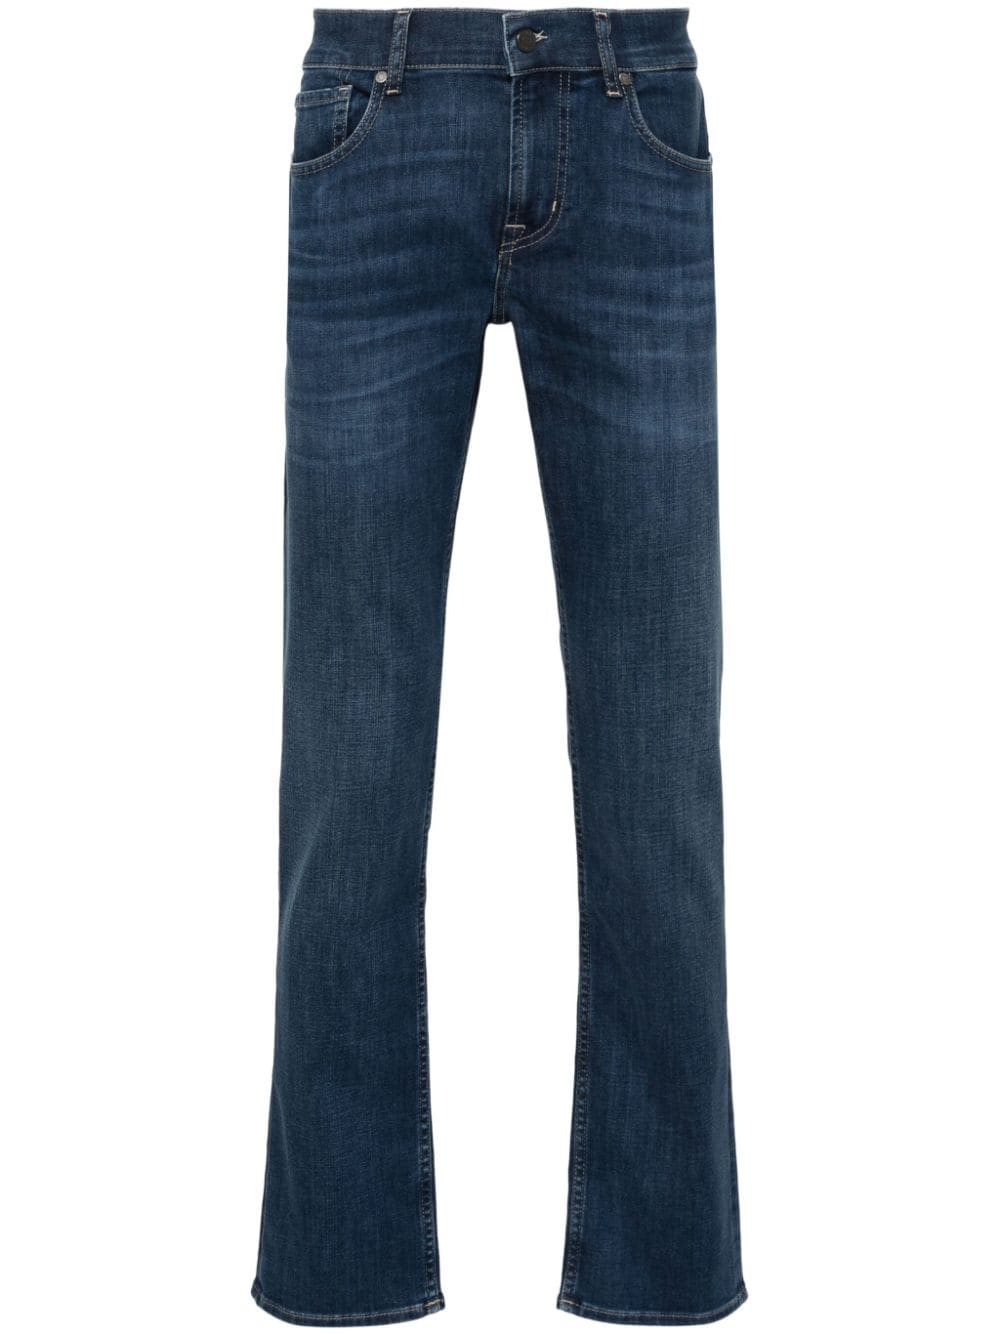 7 For All Mankind Slimmy slim-fit jeans - Blue von 7 For All Mankind